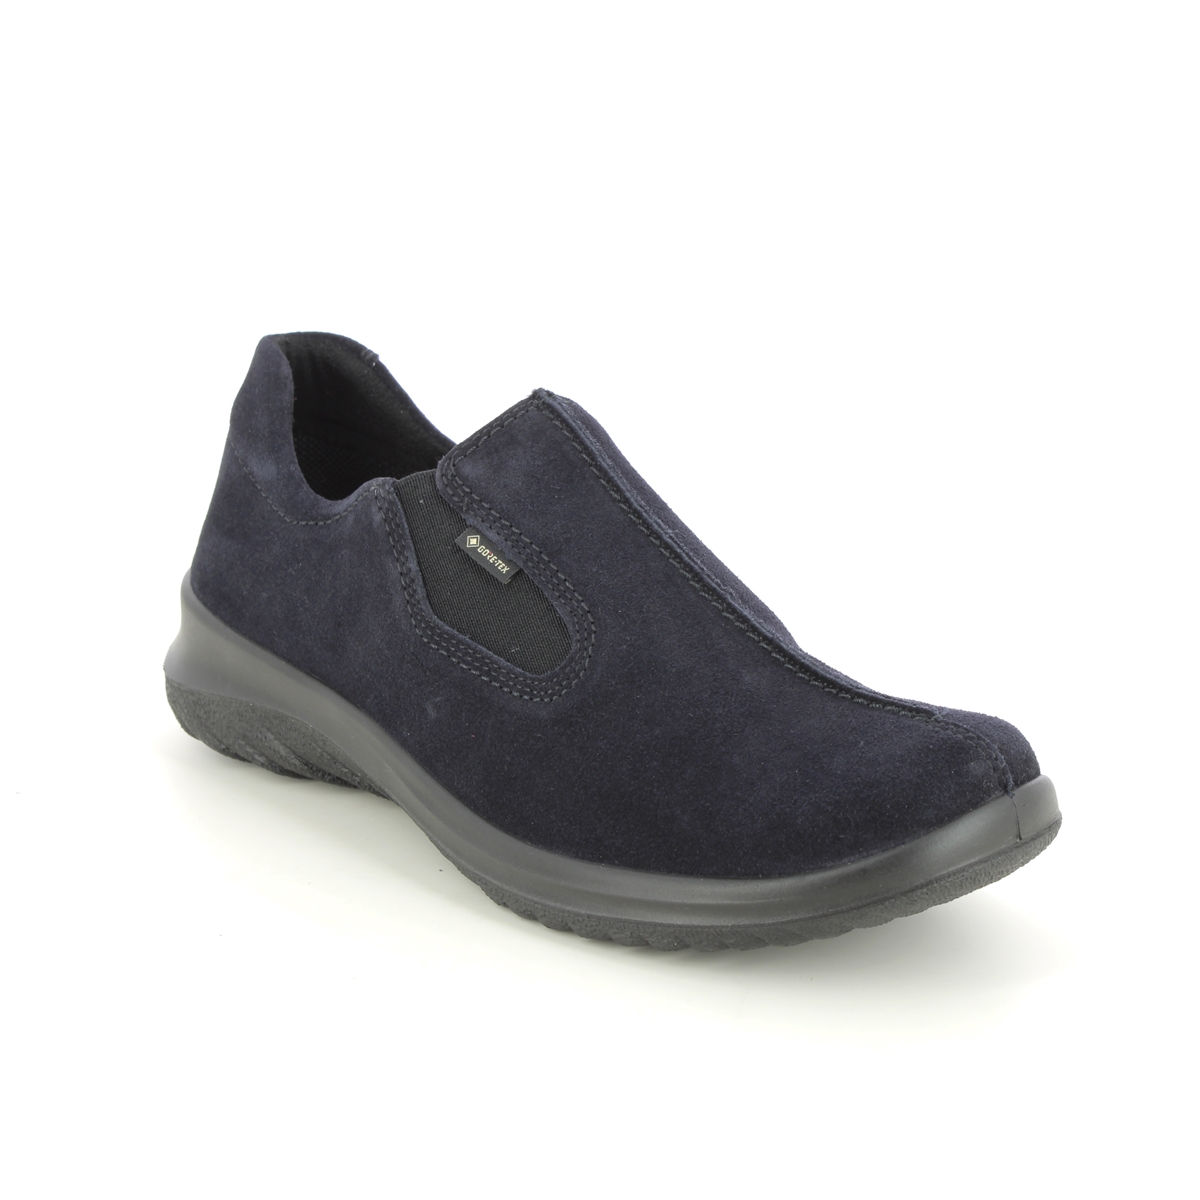 Legero Soft Shoe Gtx Navy Suede Womens Comfort Slip On Shoes 09568-80 In Size 9 In Plain Navy Suede